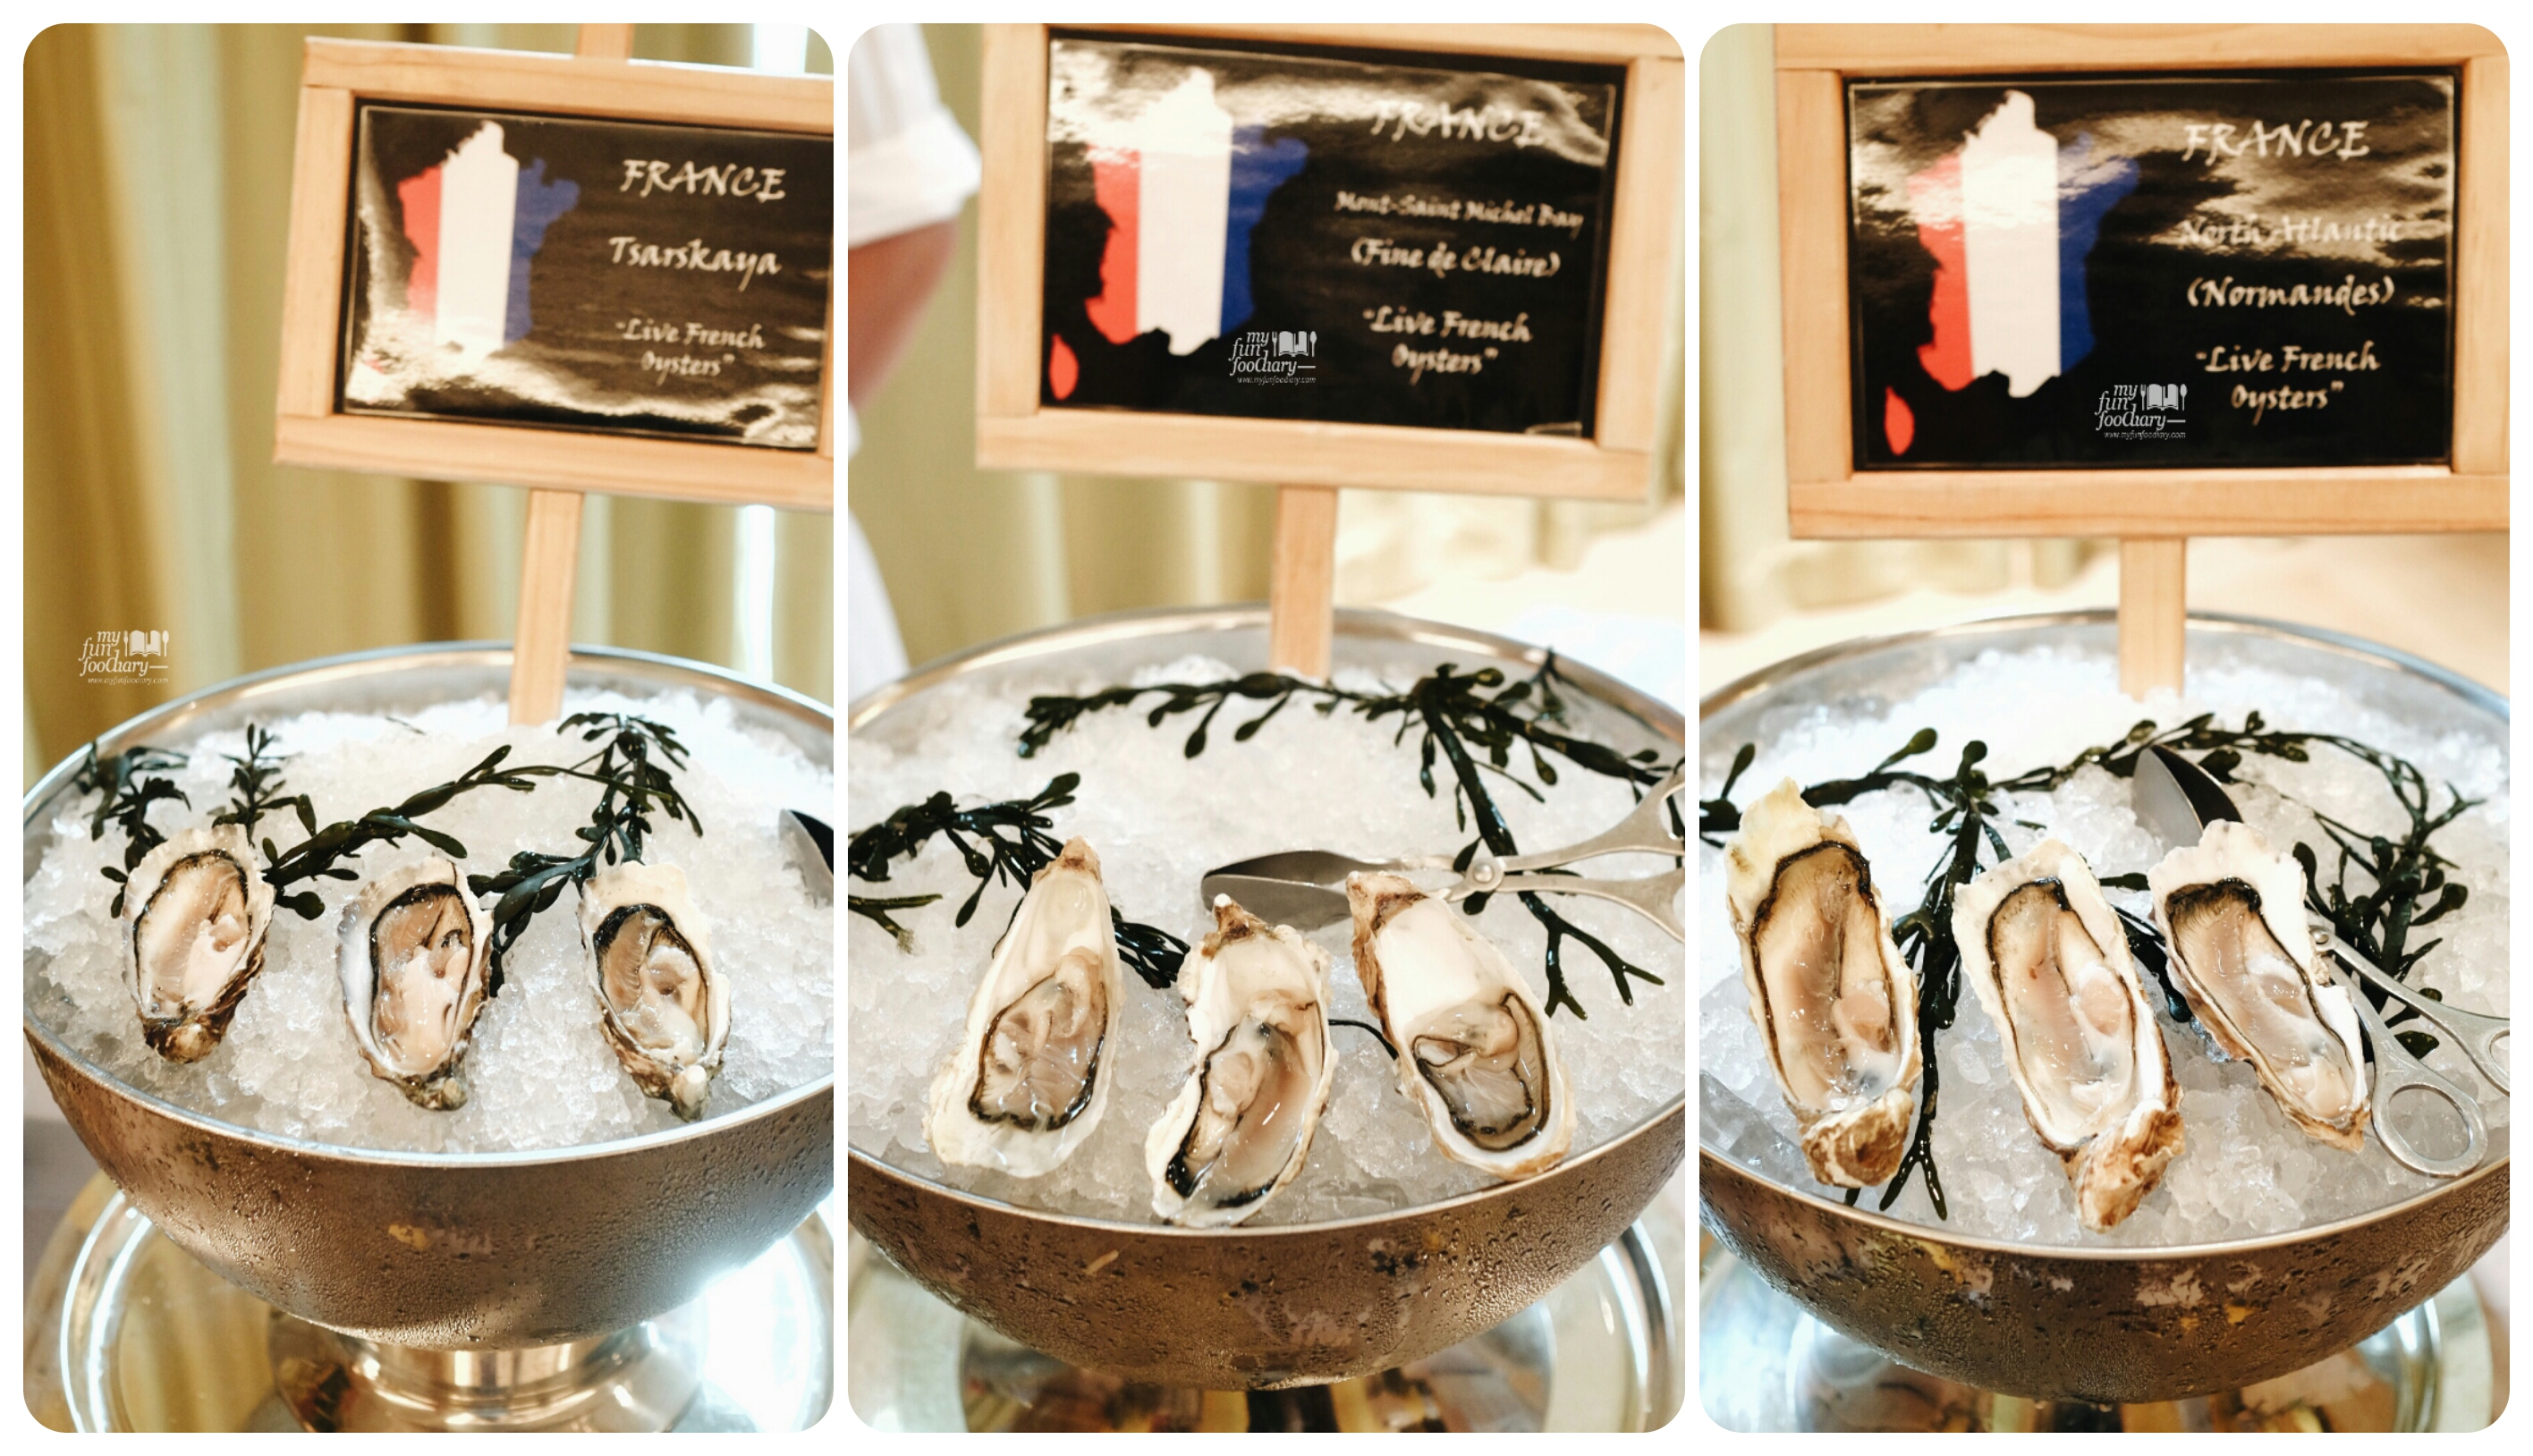 France Oysters at Conrad Singapore by Myfunfoodiary